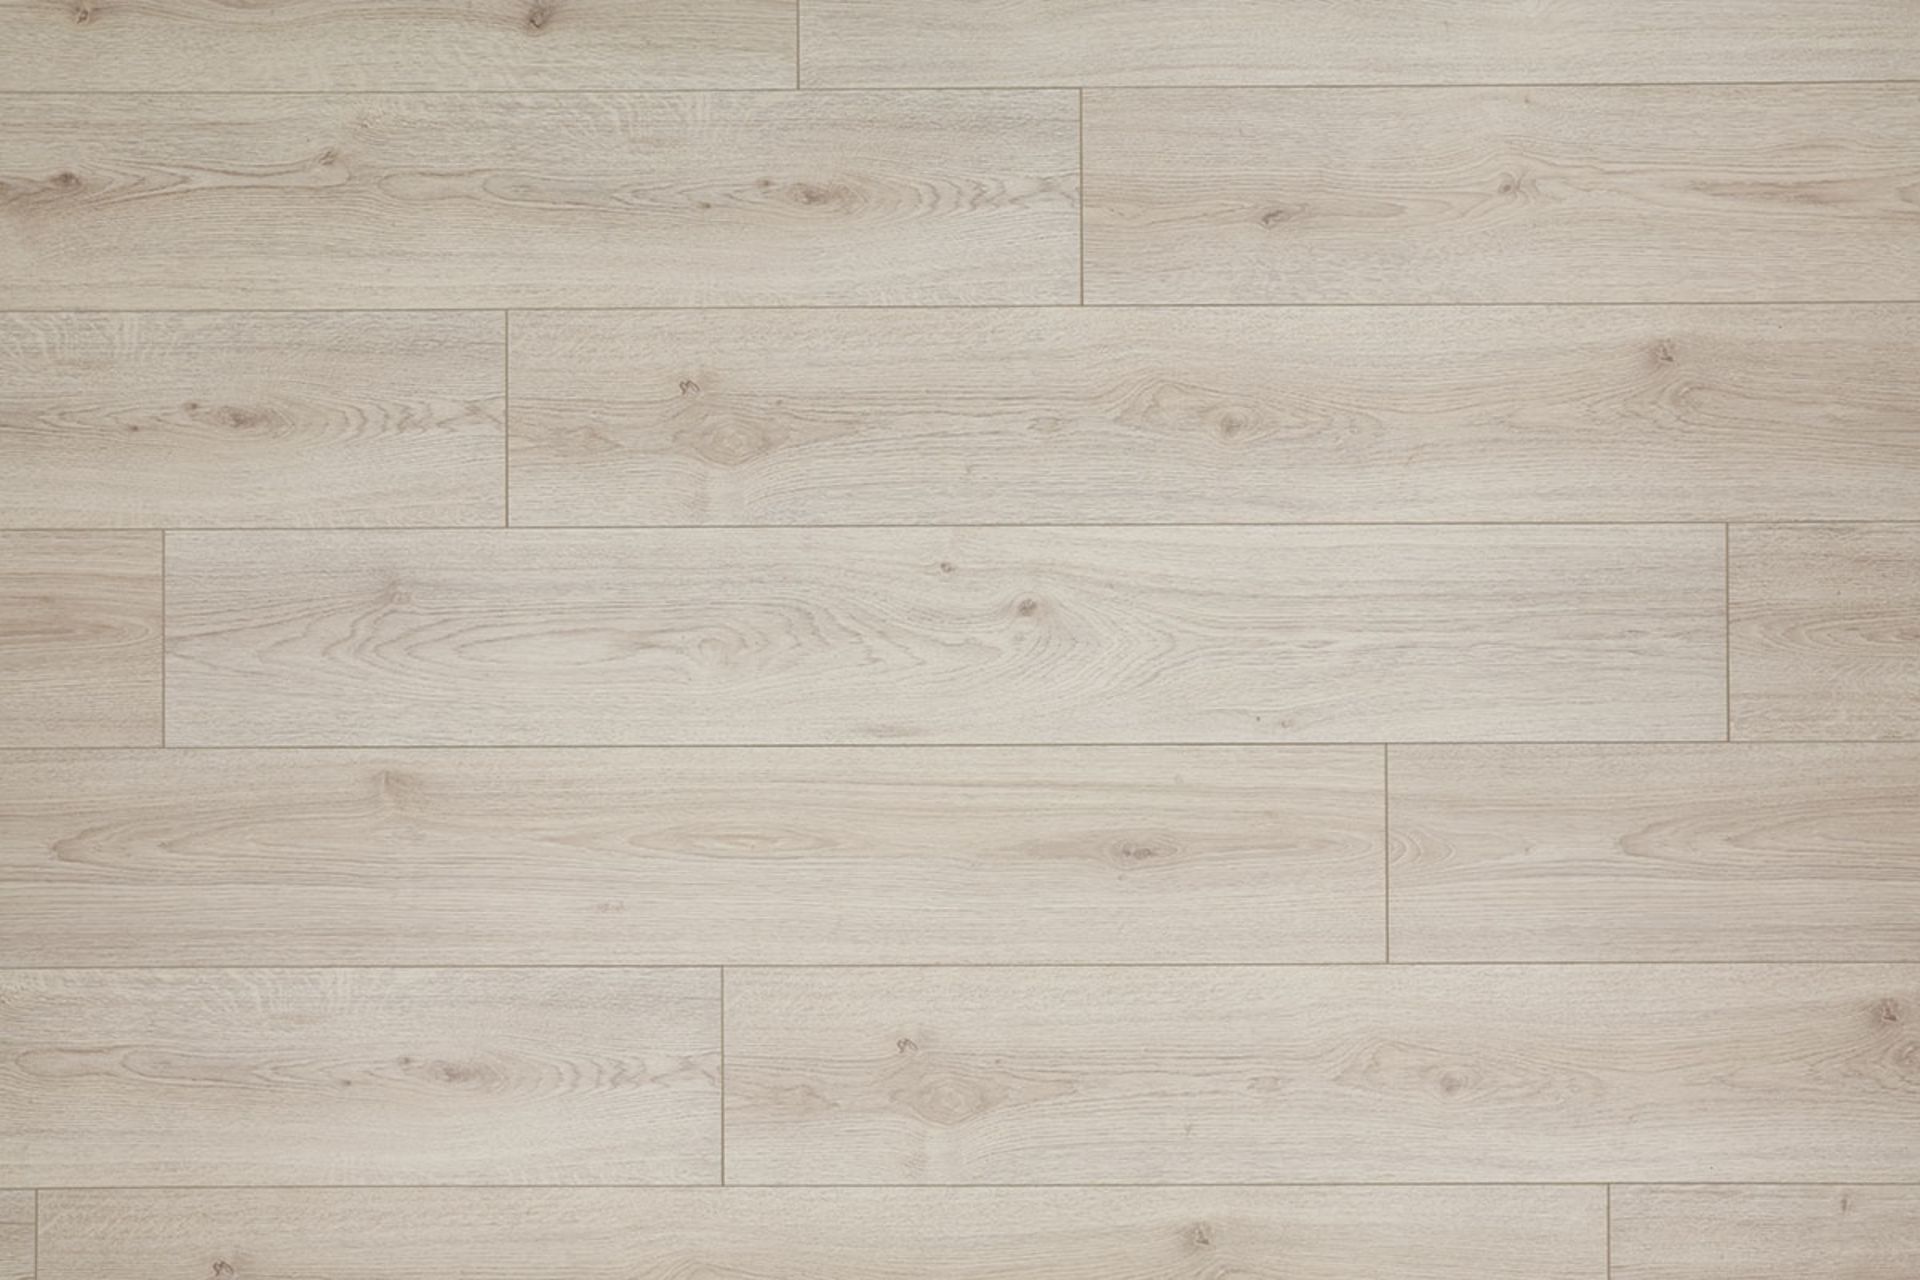 NEW 7.17 Square Meters of LAMINATE FLOORING TREND GREY OAK. With a warm grey hue and an authent... - Image 2 of 2